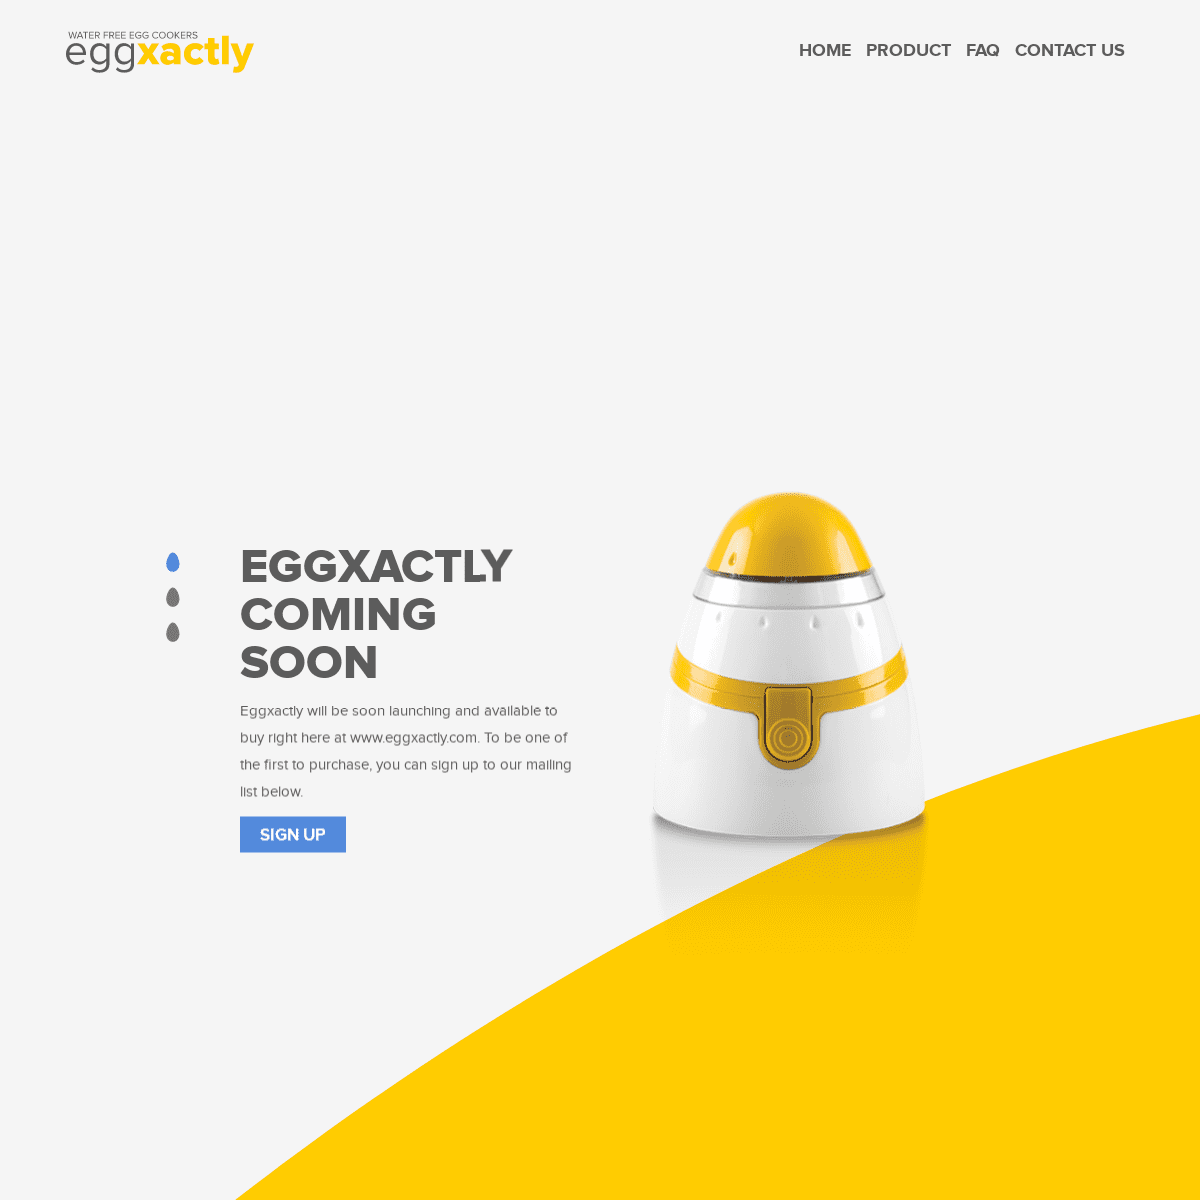 A complete backup of eggxactly.com